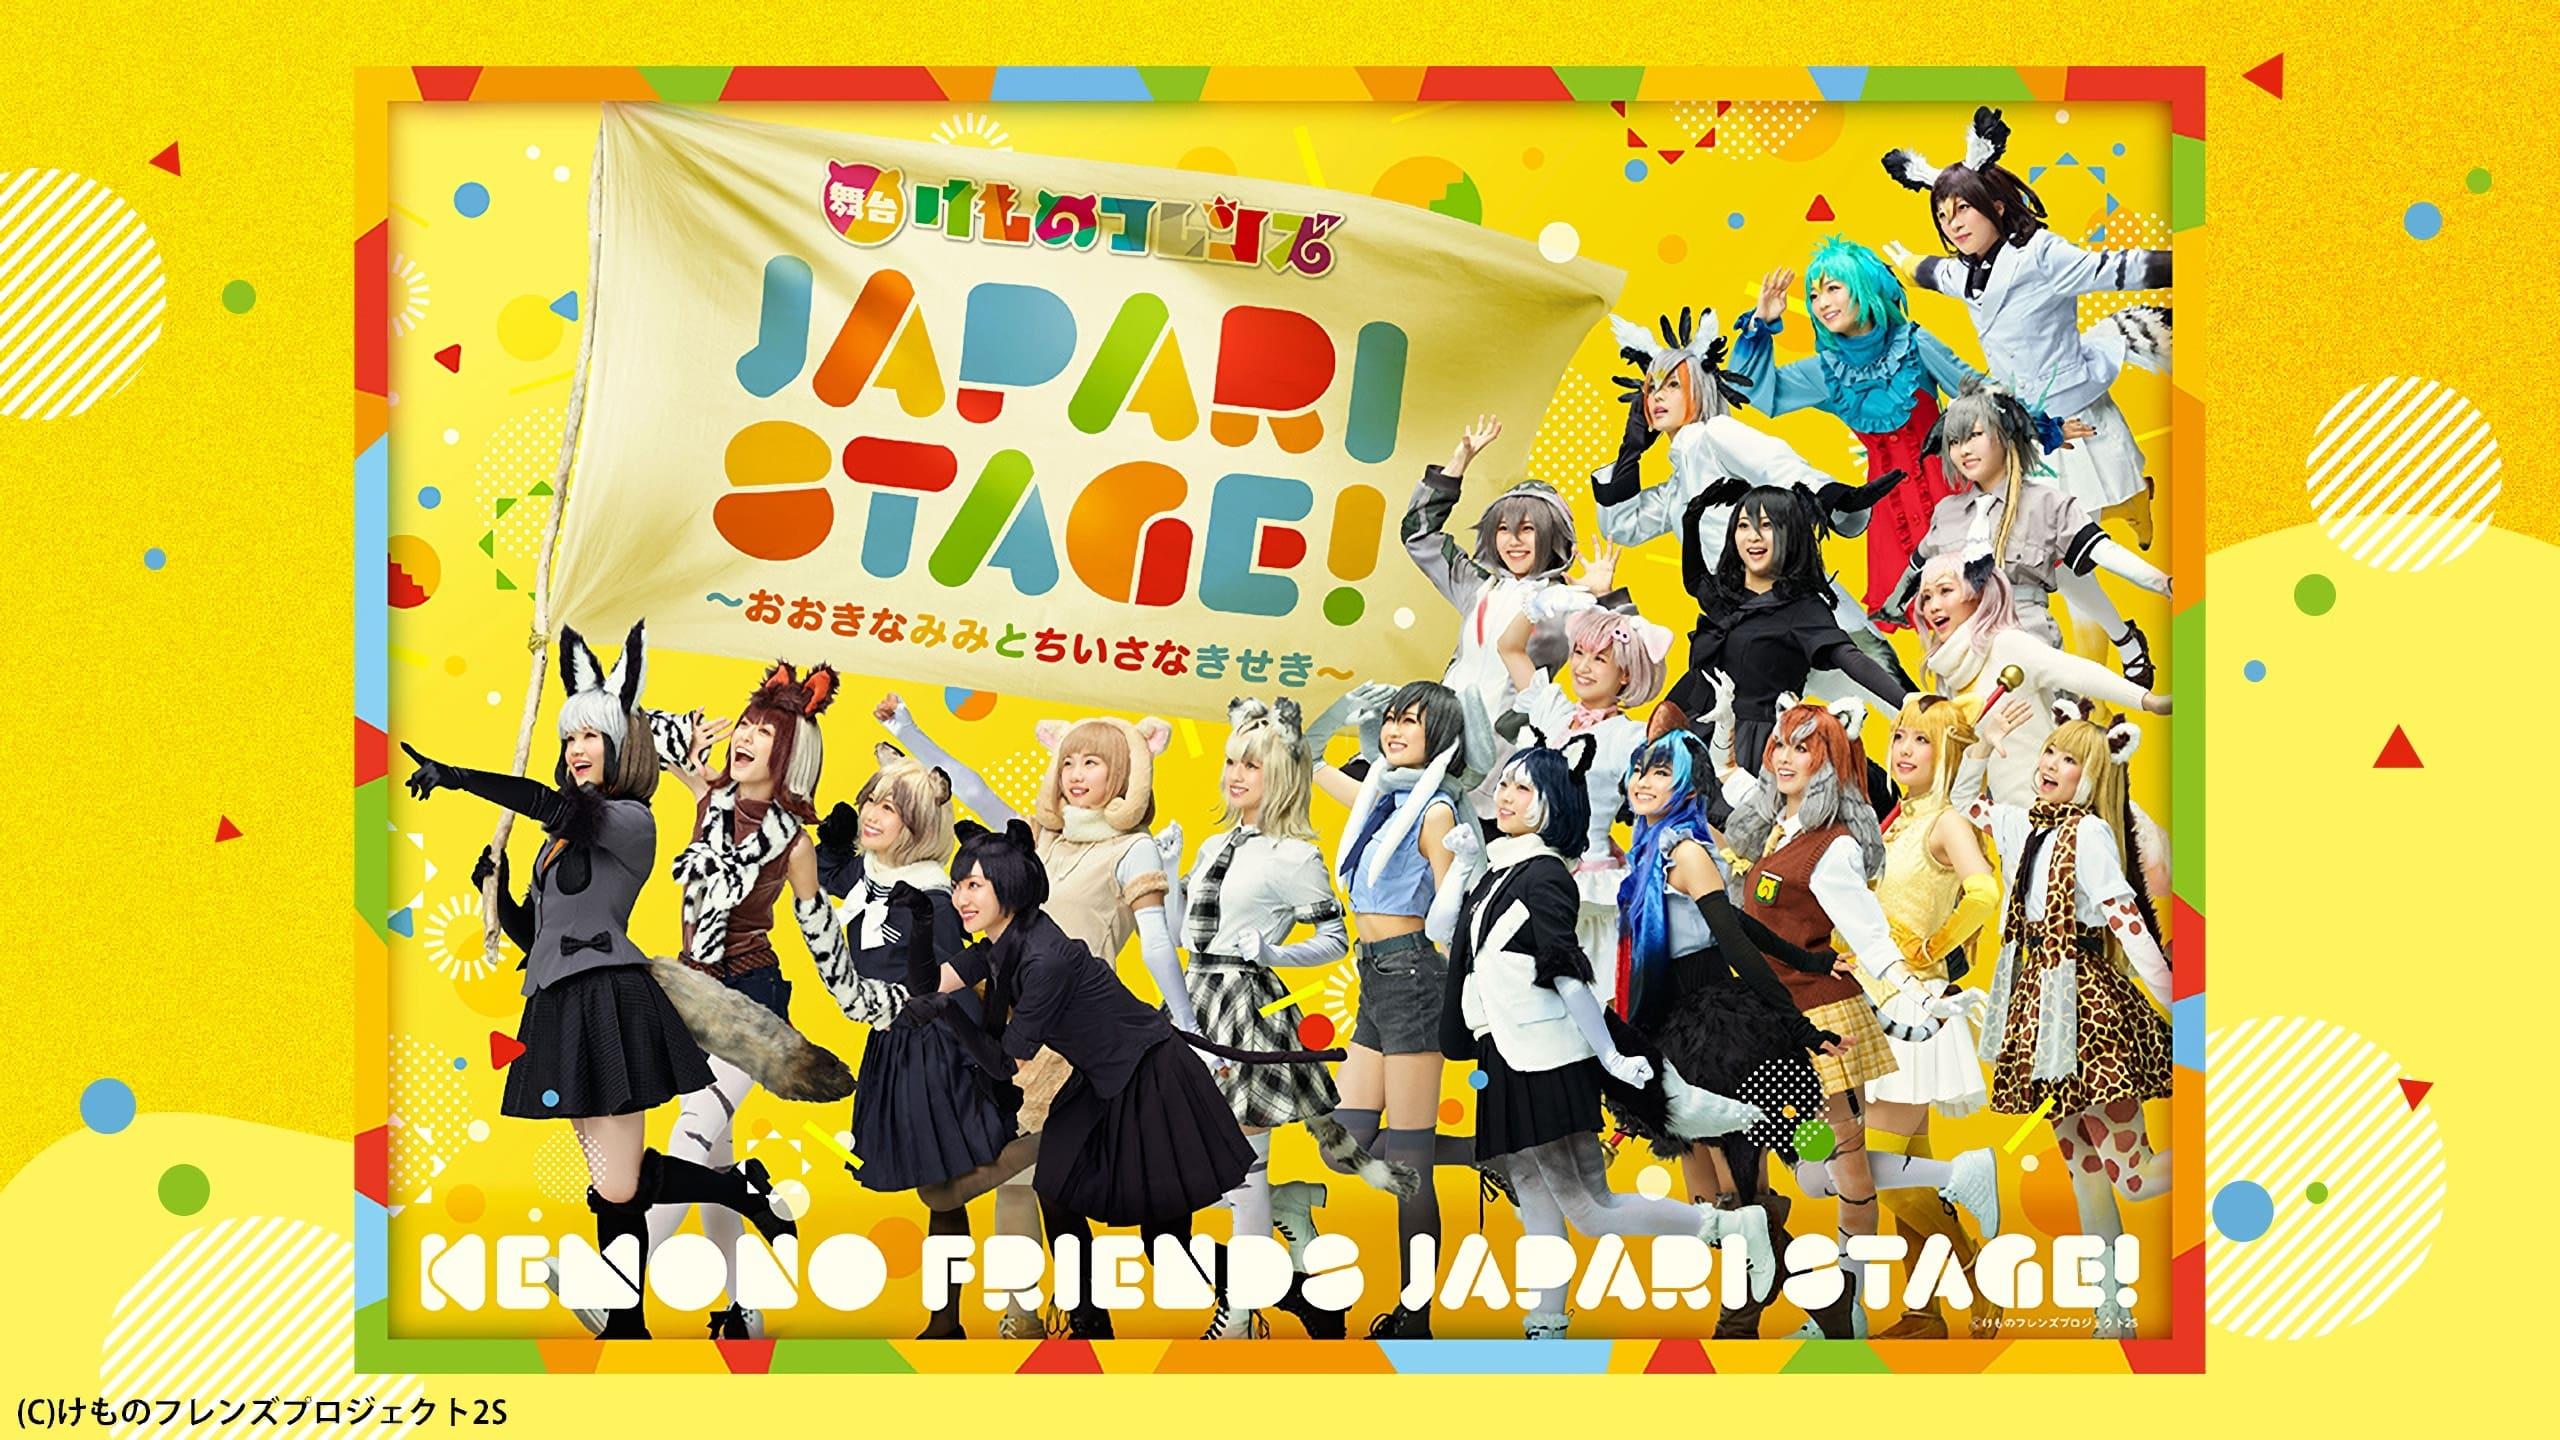 Stage Kemono Friends “JAPARI STAGE!” ~The Big Ear and the Small Miracle~ backdrop